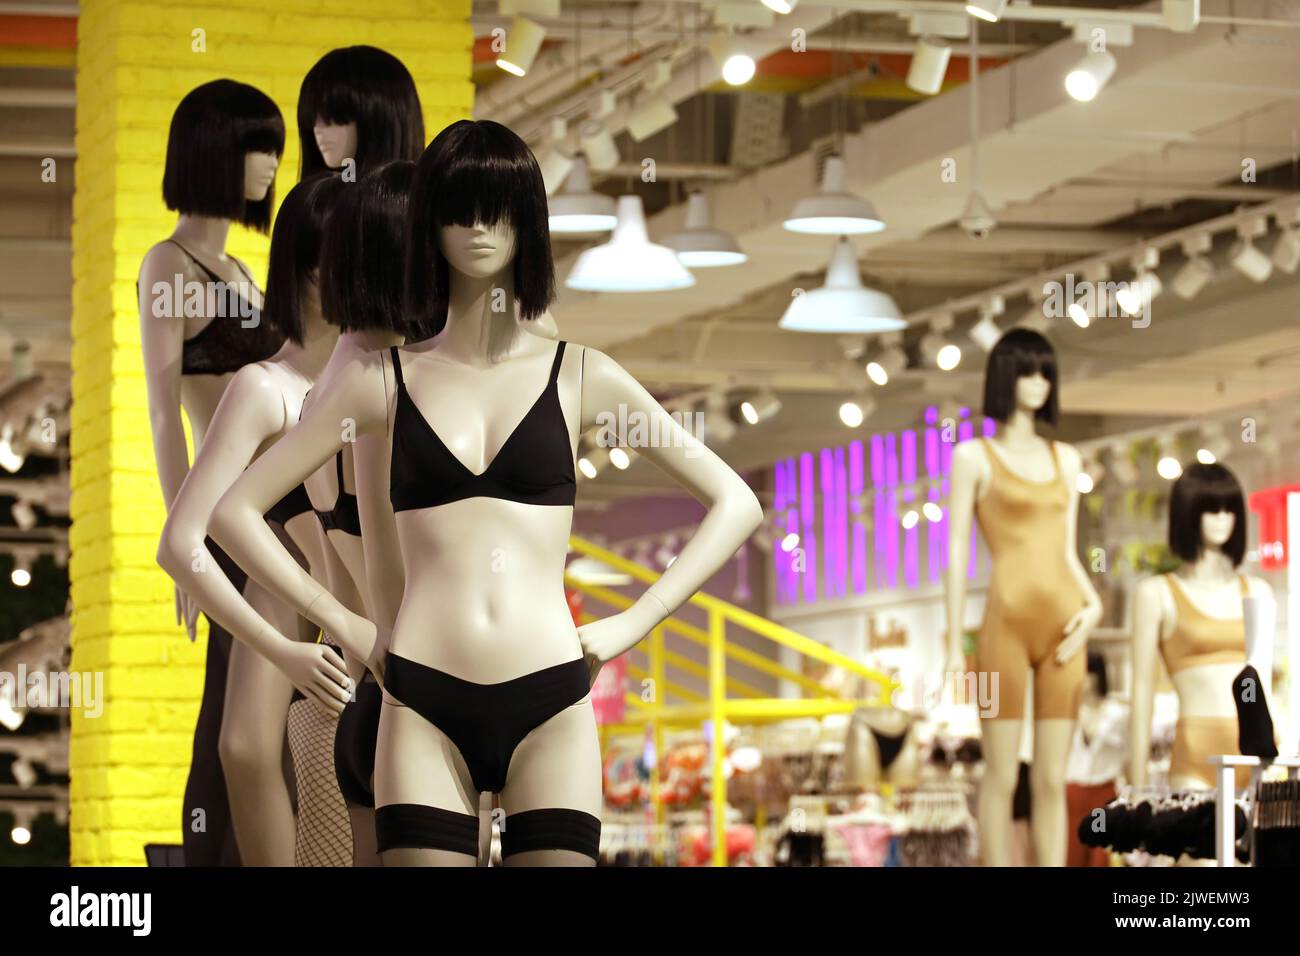 Female mannequins in black underwear and wigs. Lingerie store, bra, panties and stockings in a shop Stock Photo